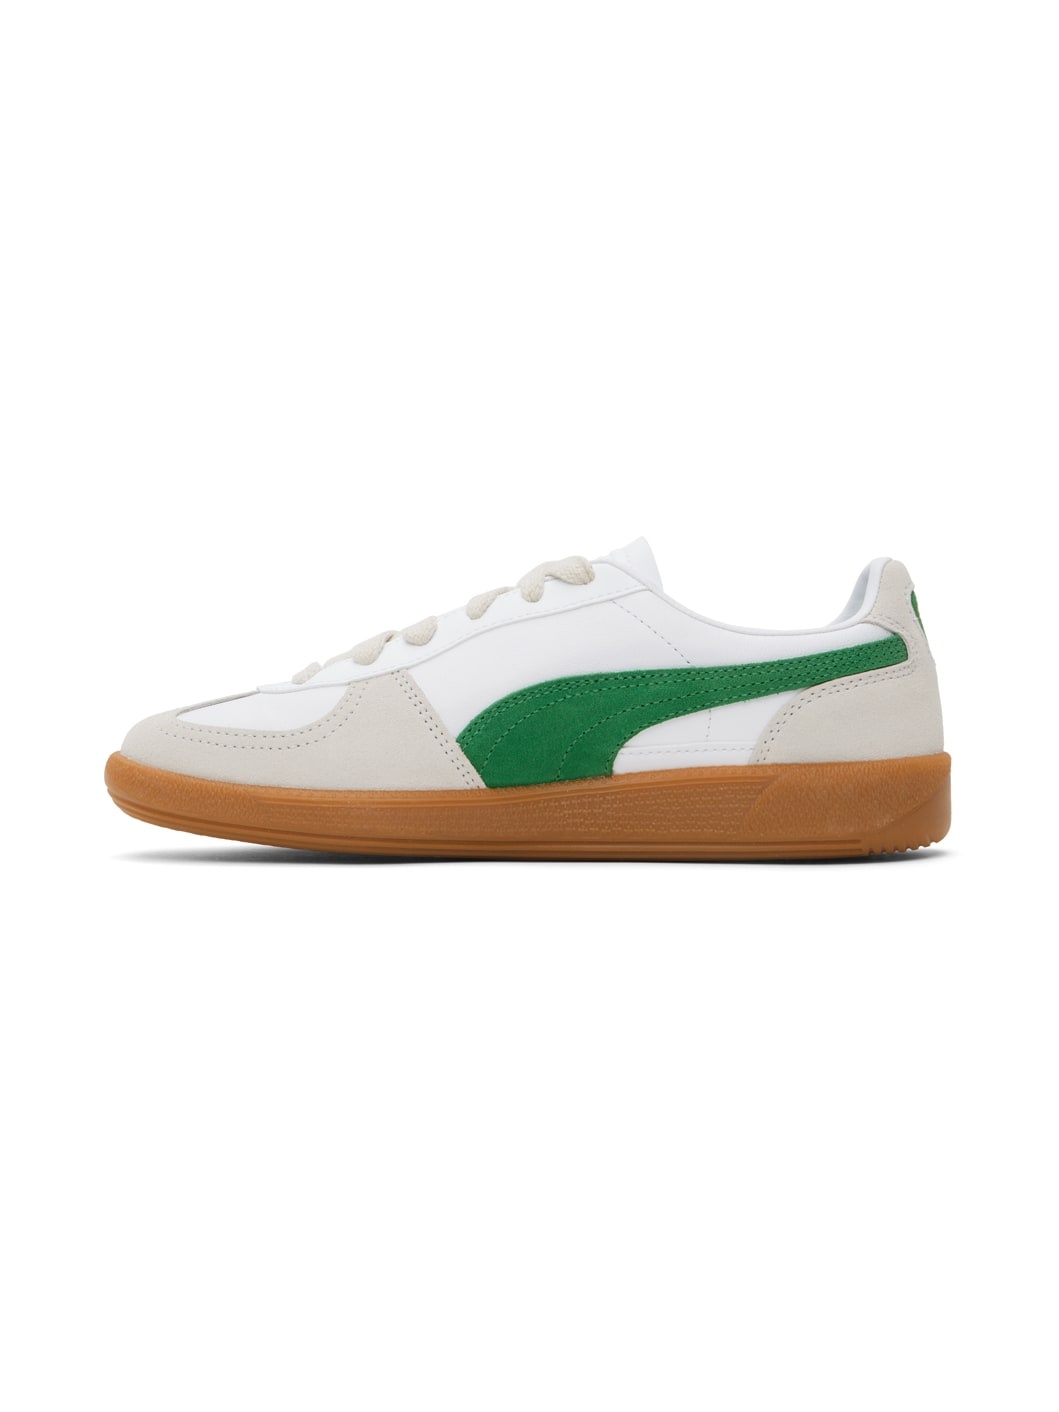 Off-White & Green Palermo Leather Sneakers - 3